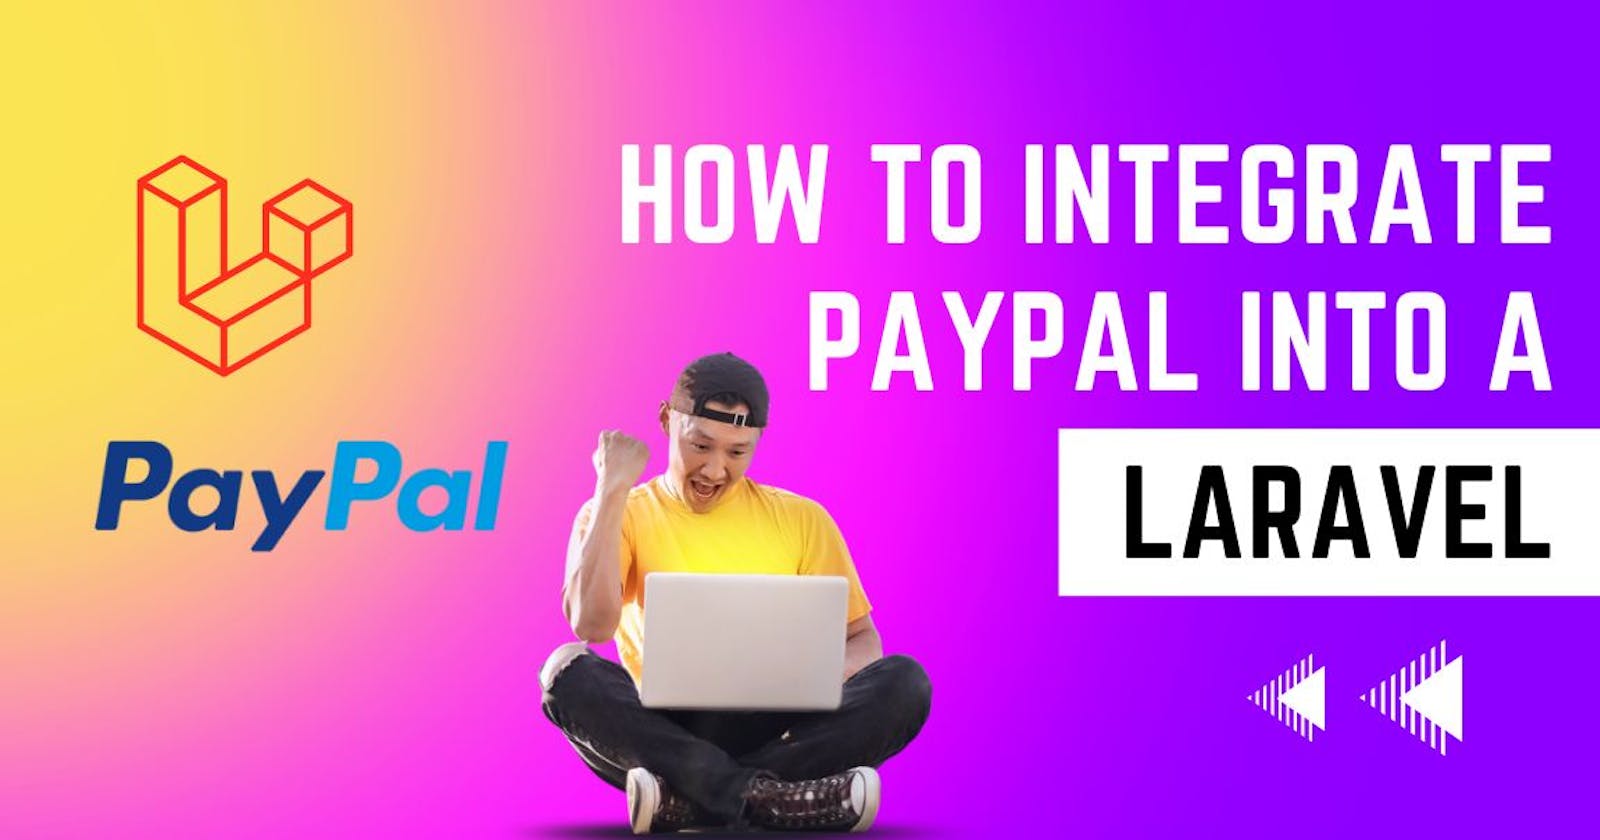 Step-by-Step Guide: How to Integrate PayPal into a Laravel